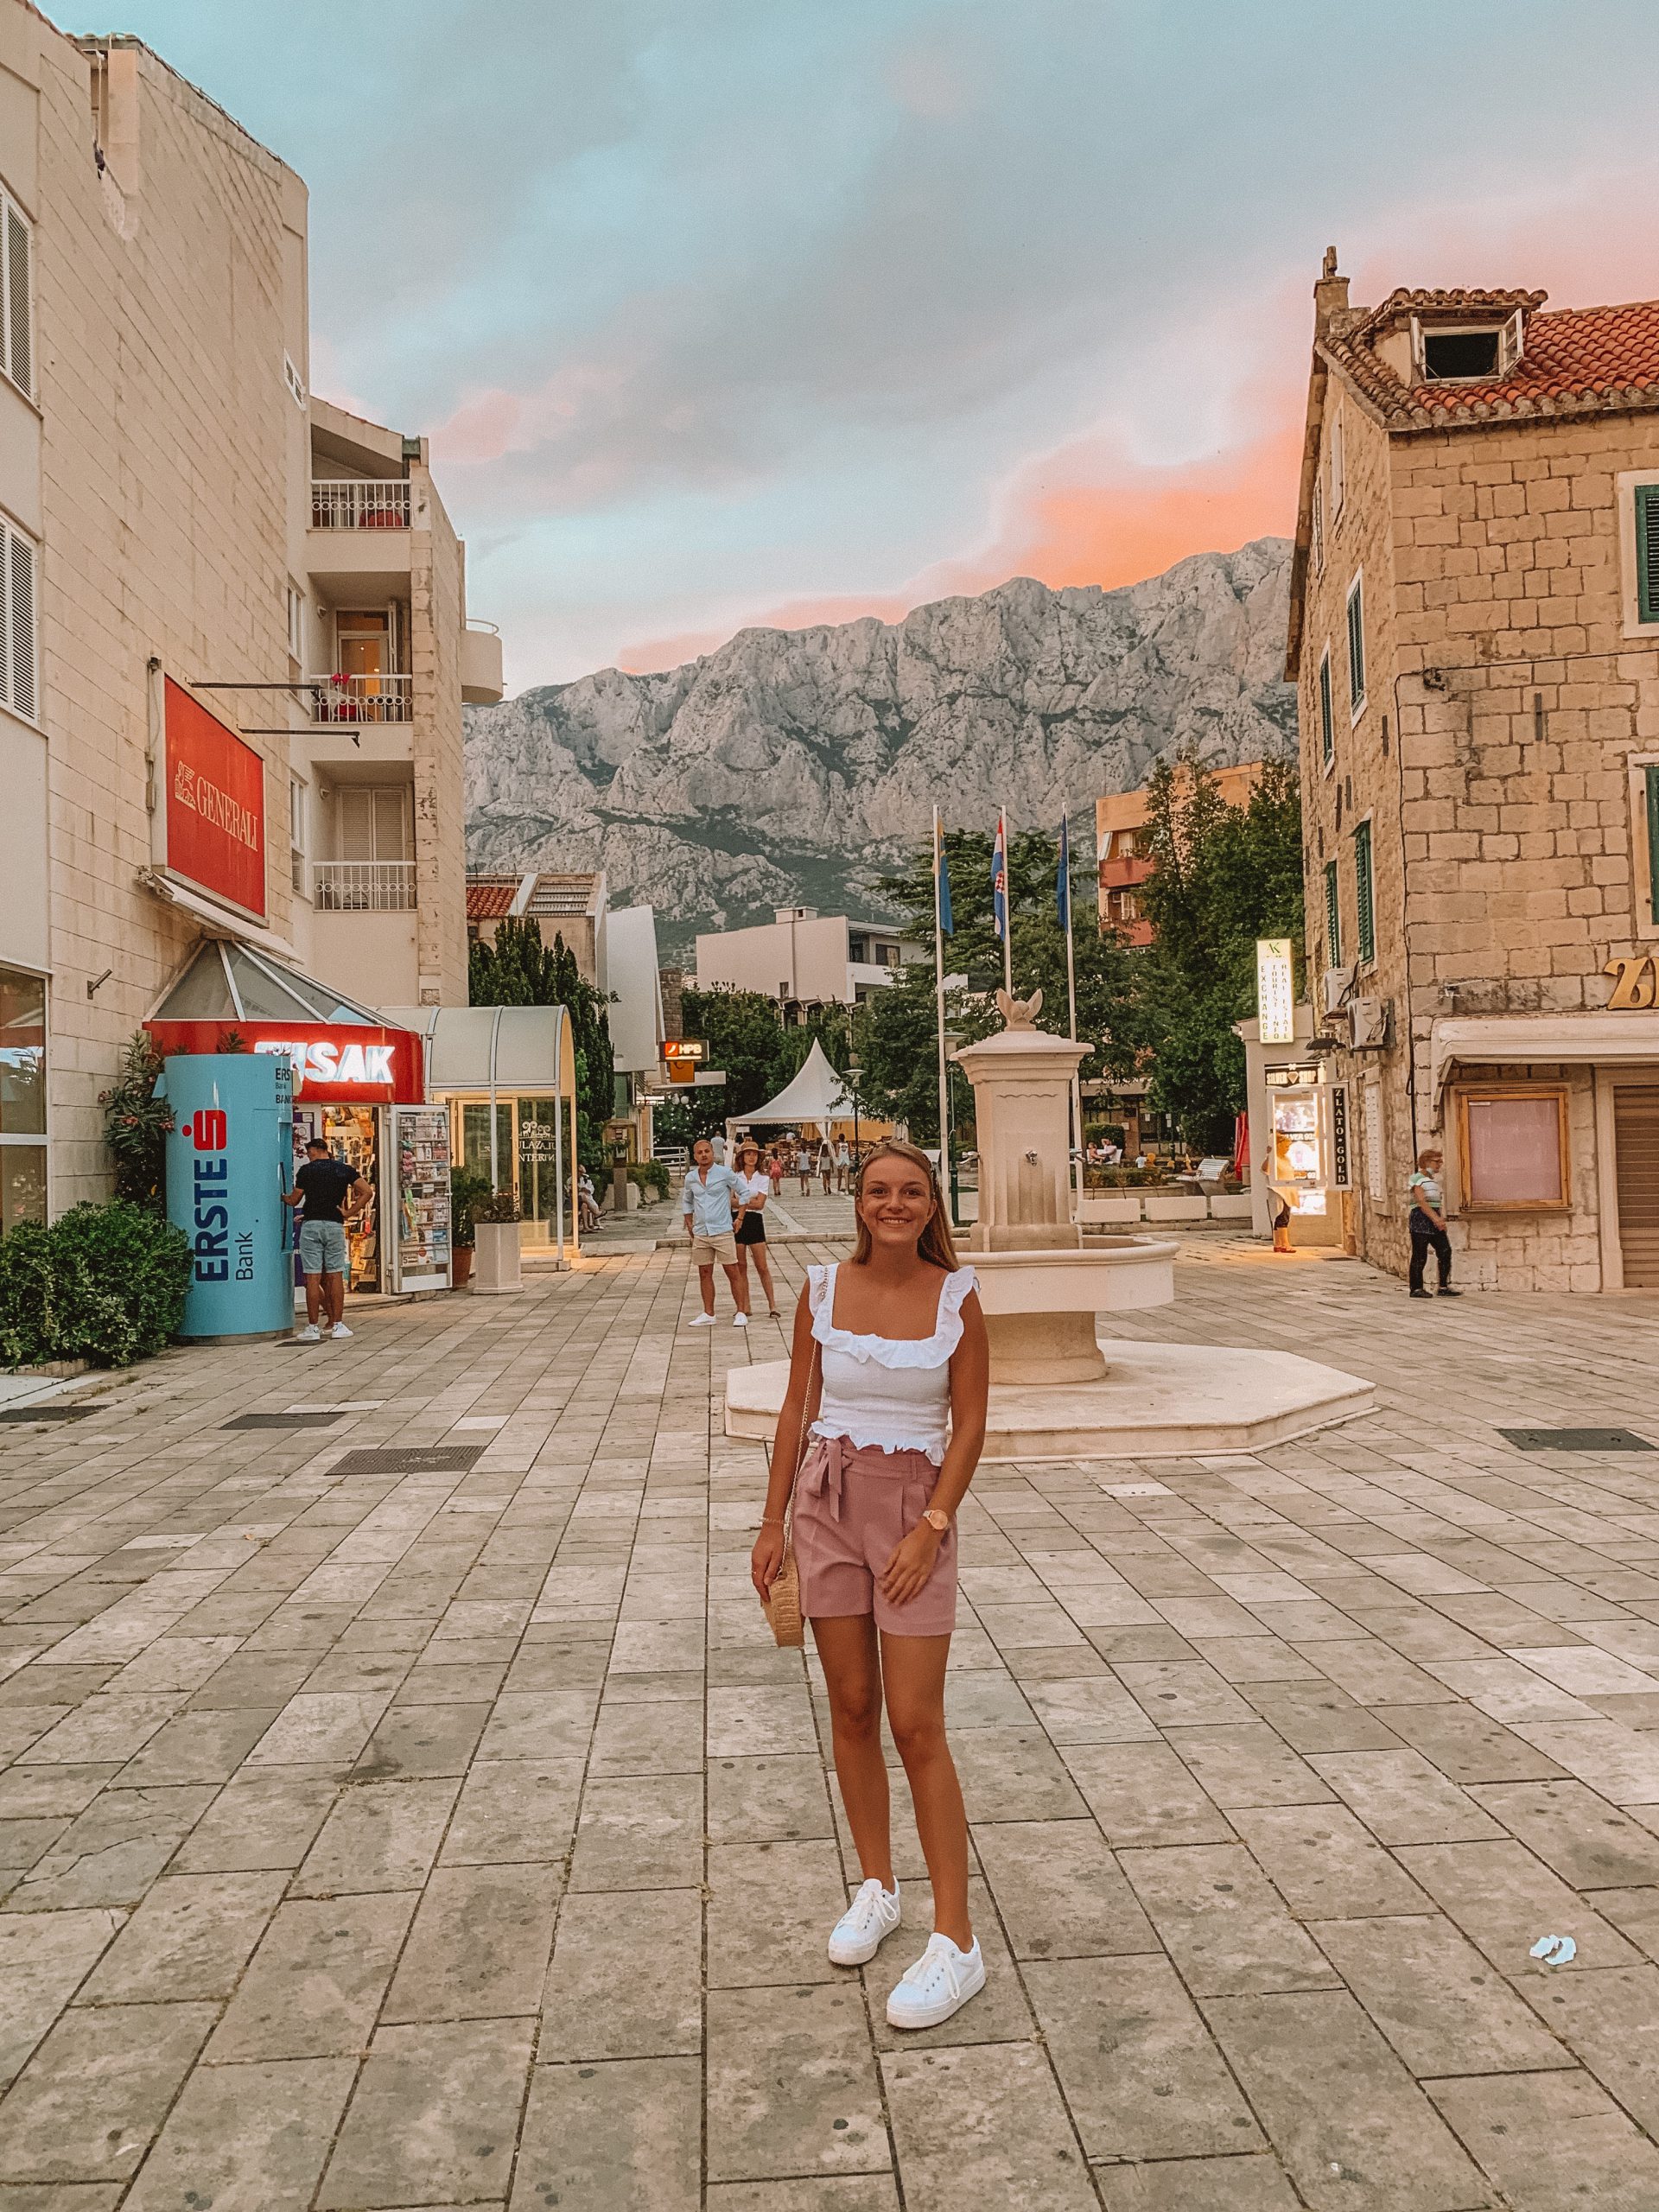 A woman in Makarska town with the mountain and sunset background